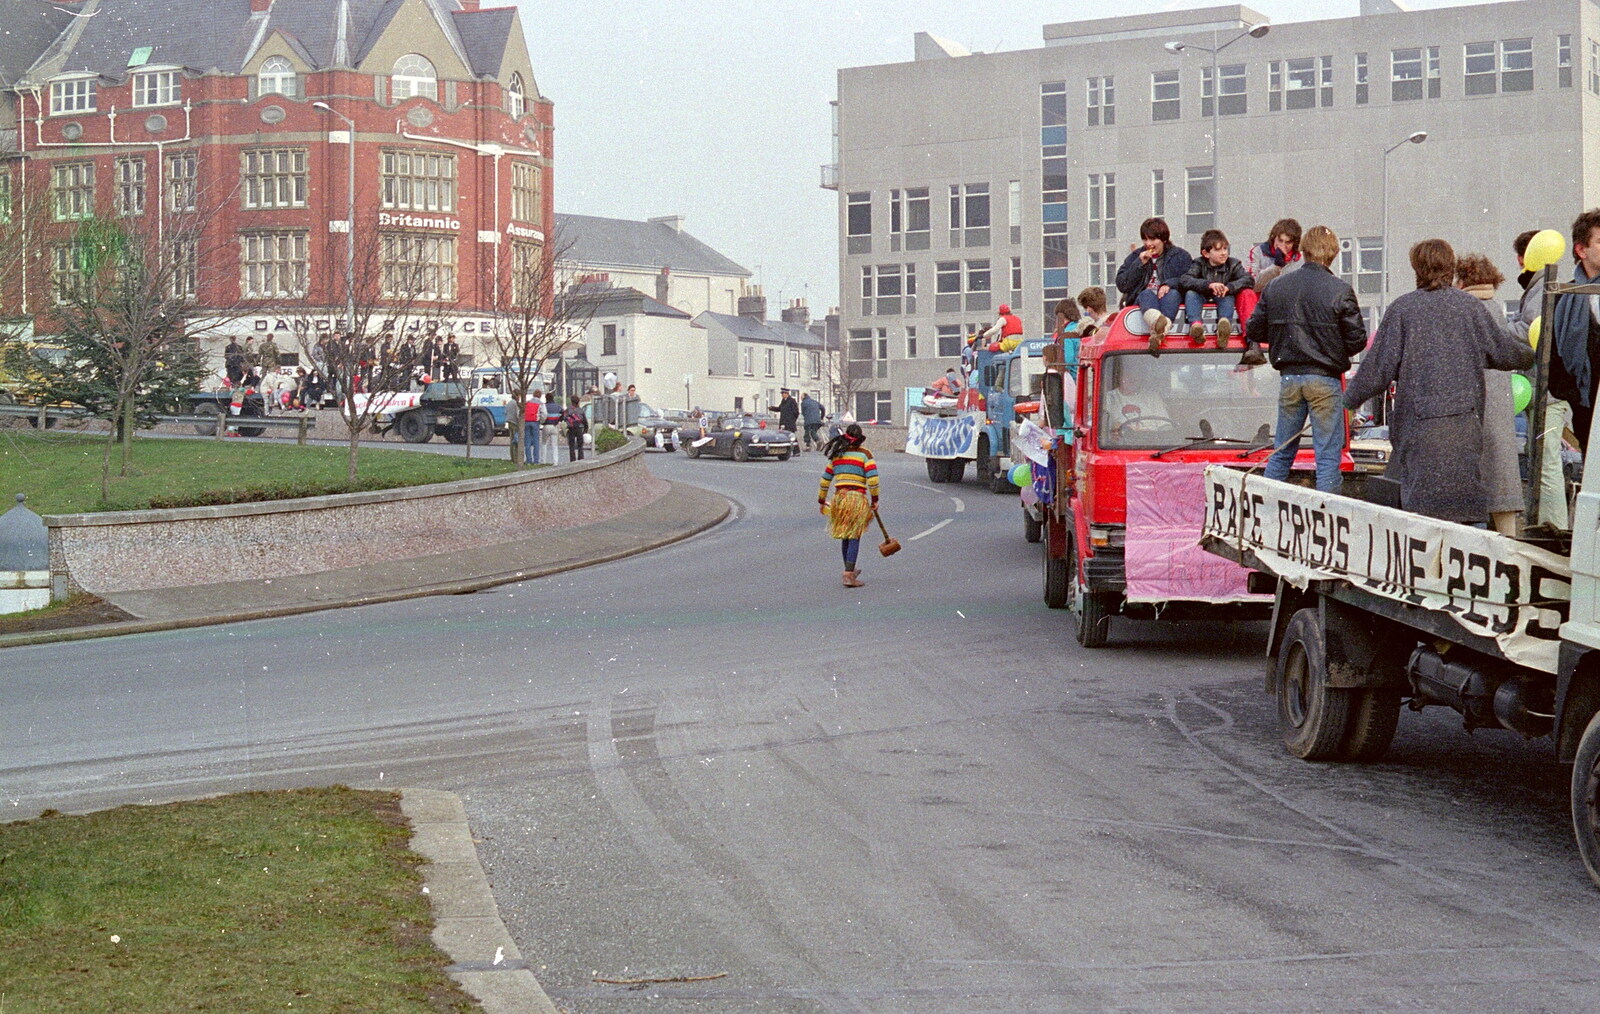 The procession heads around Drake Circus roundabout from Uni: PPSU "Jazz" RAG Street Parade, Plymouth, Devon - 17th February 1986